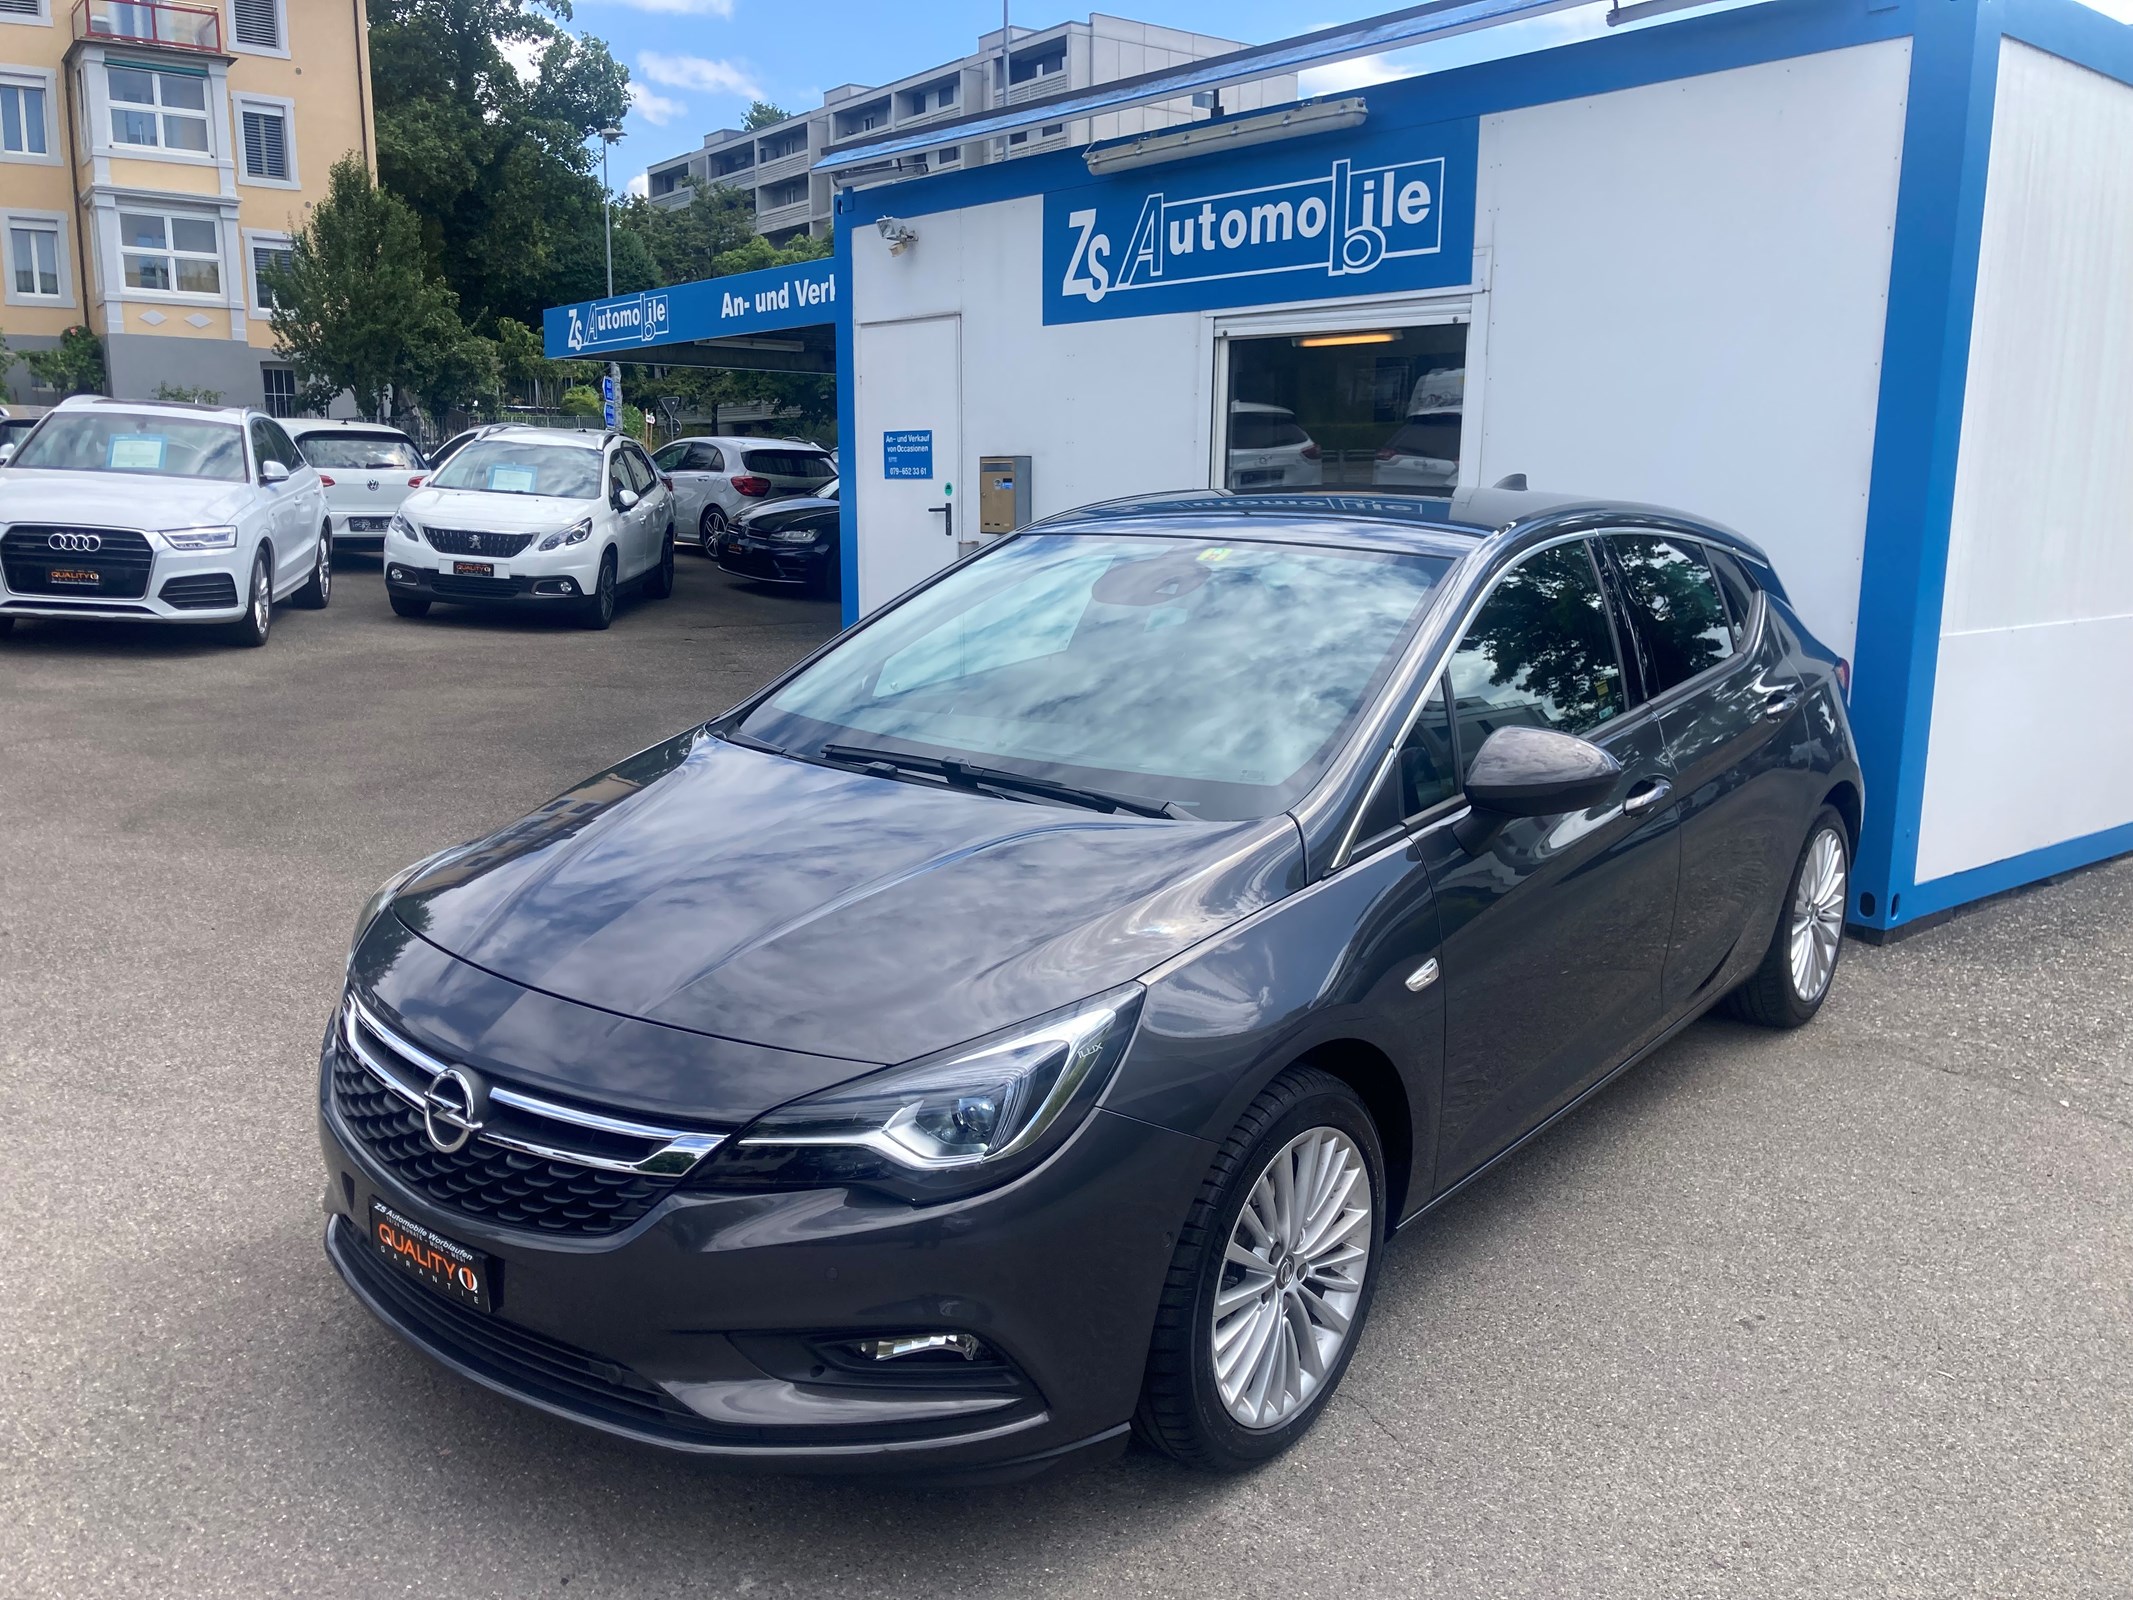 OPEL Astra 1.6 CDTi ecoF Excellence Automatic